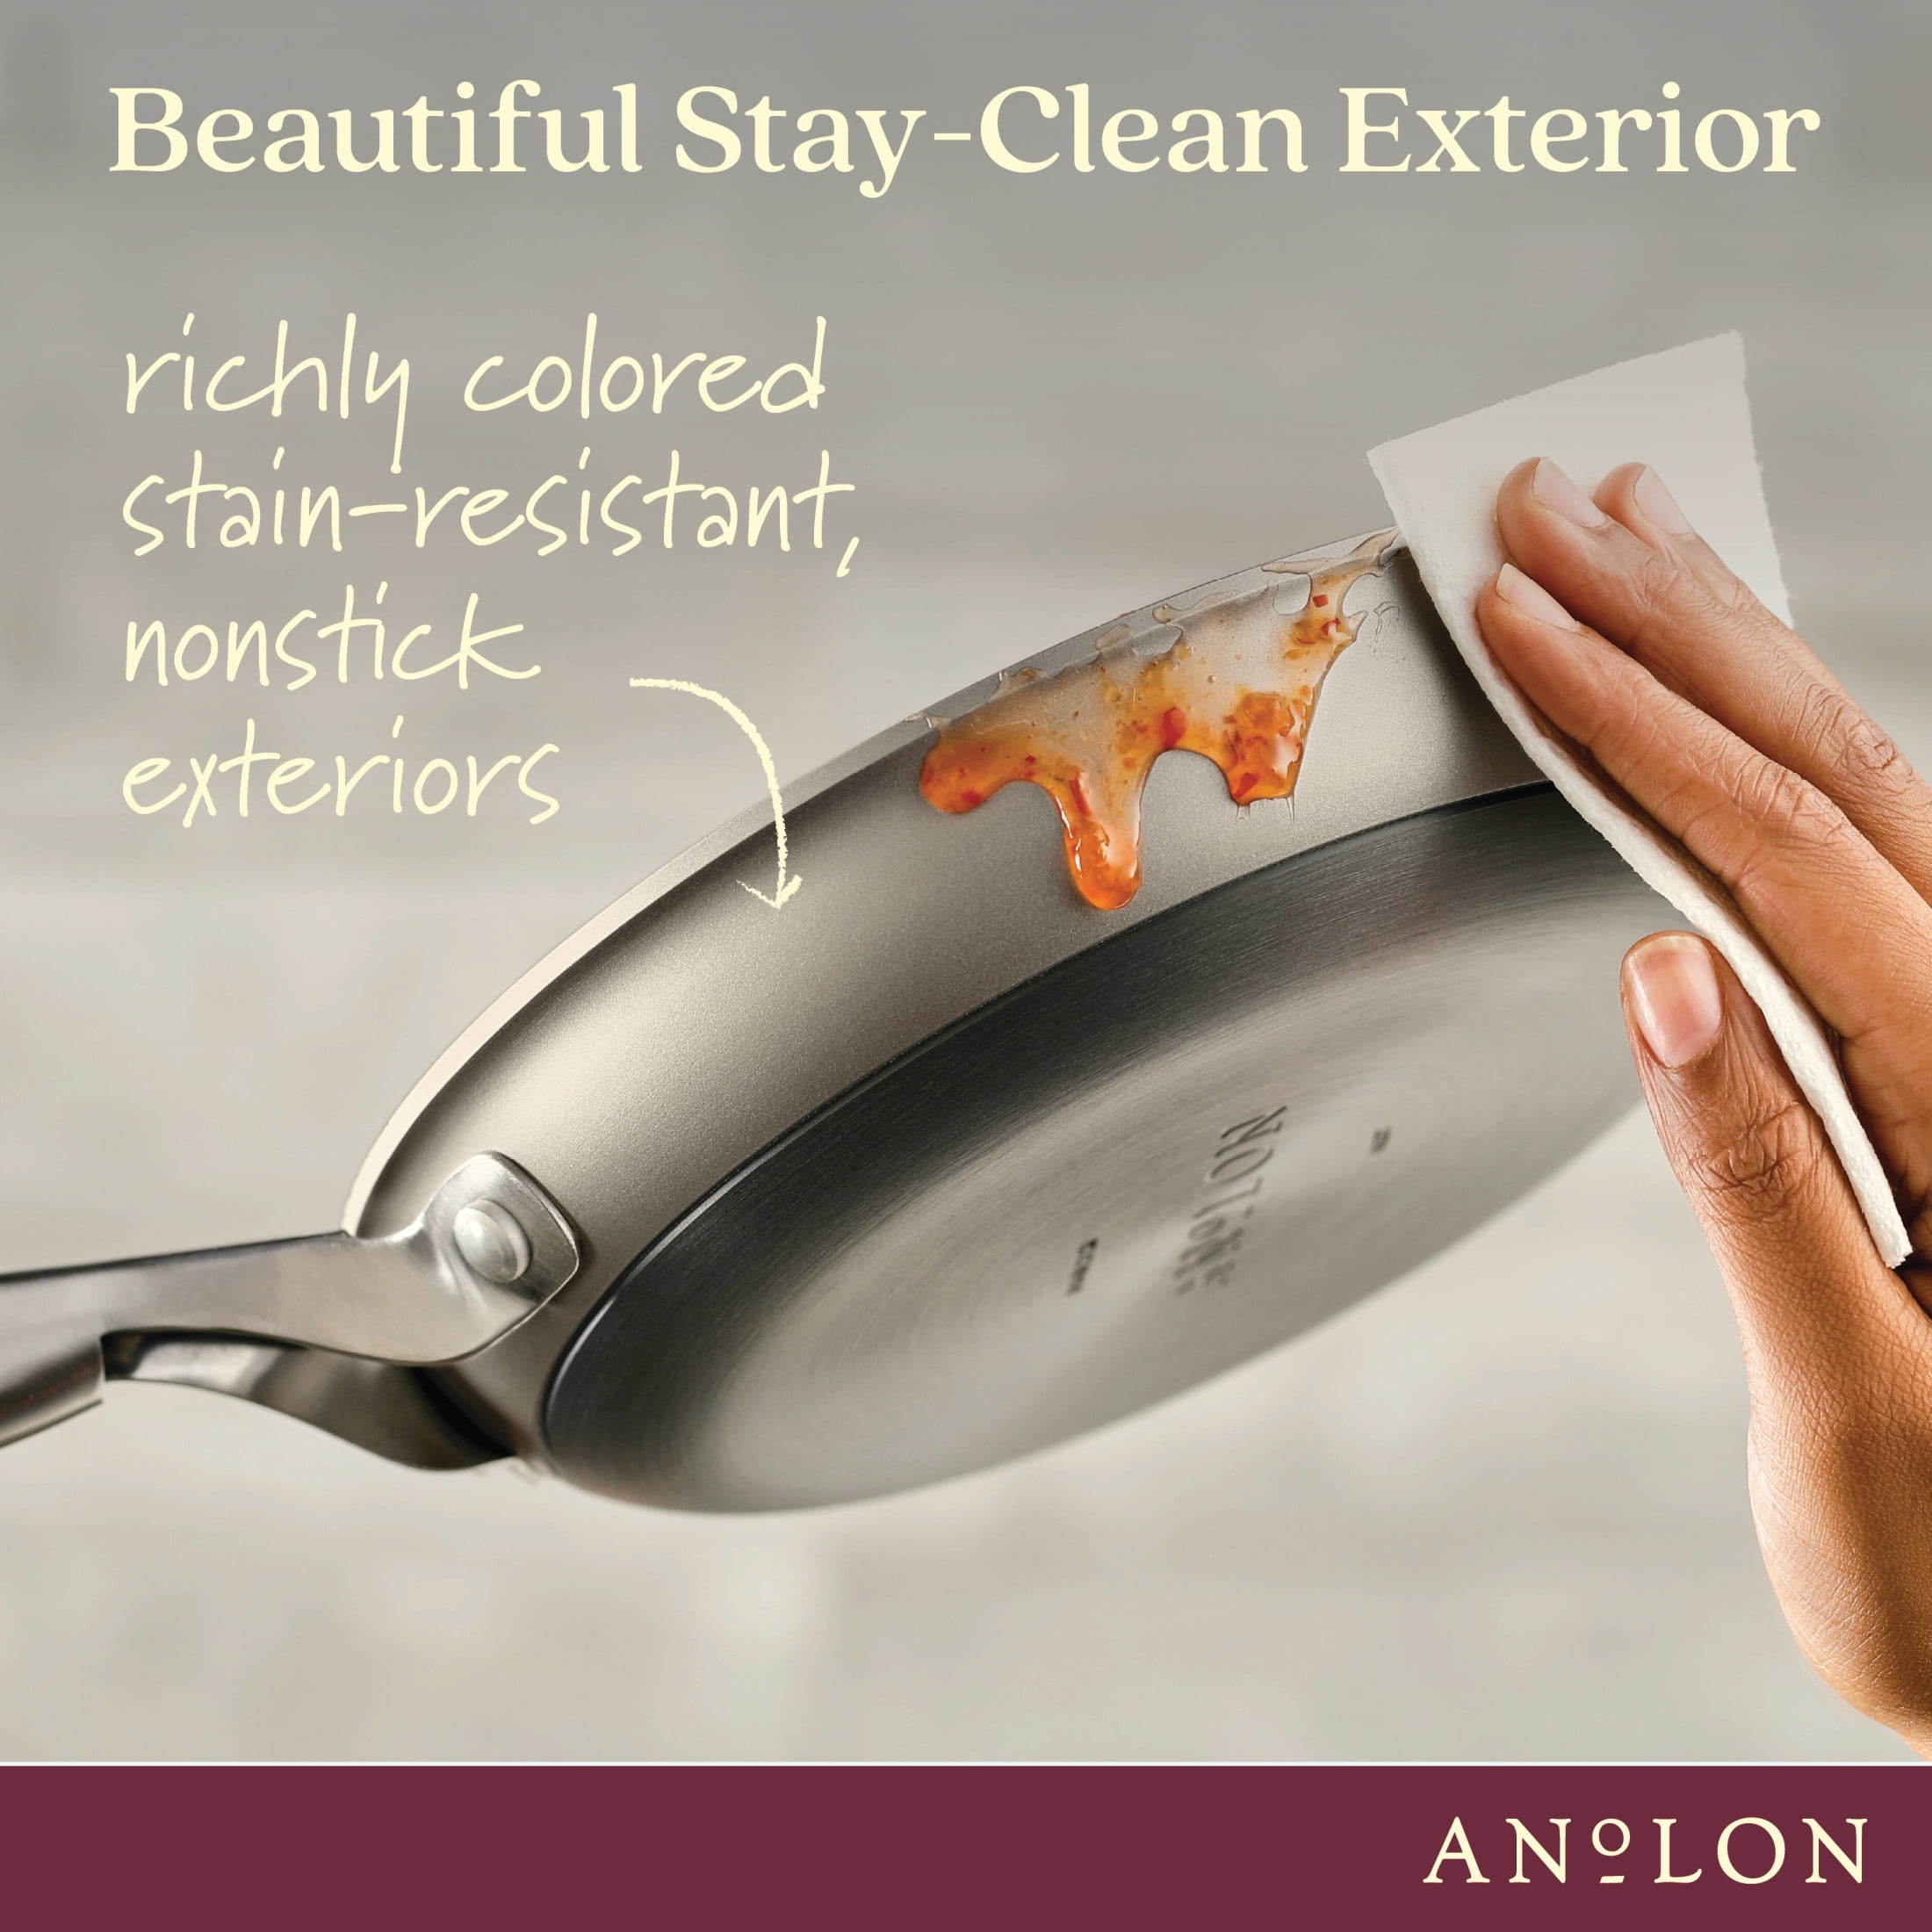 Anolon Achieve Hard Anodized Nonstick Frying Pan, 10-Inch, Cream